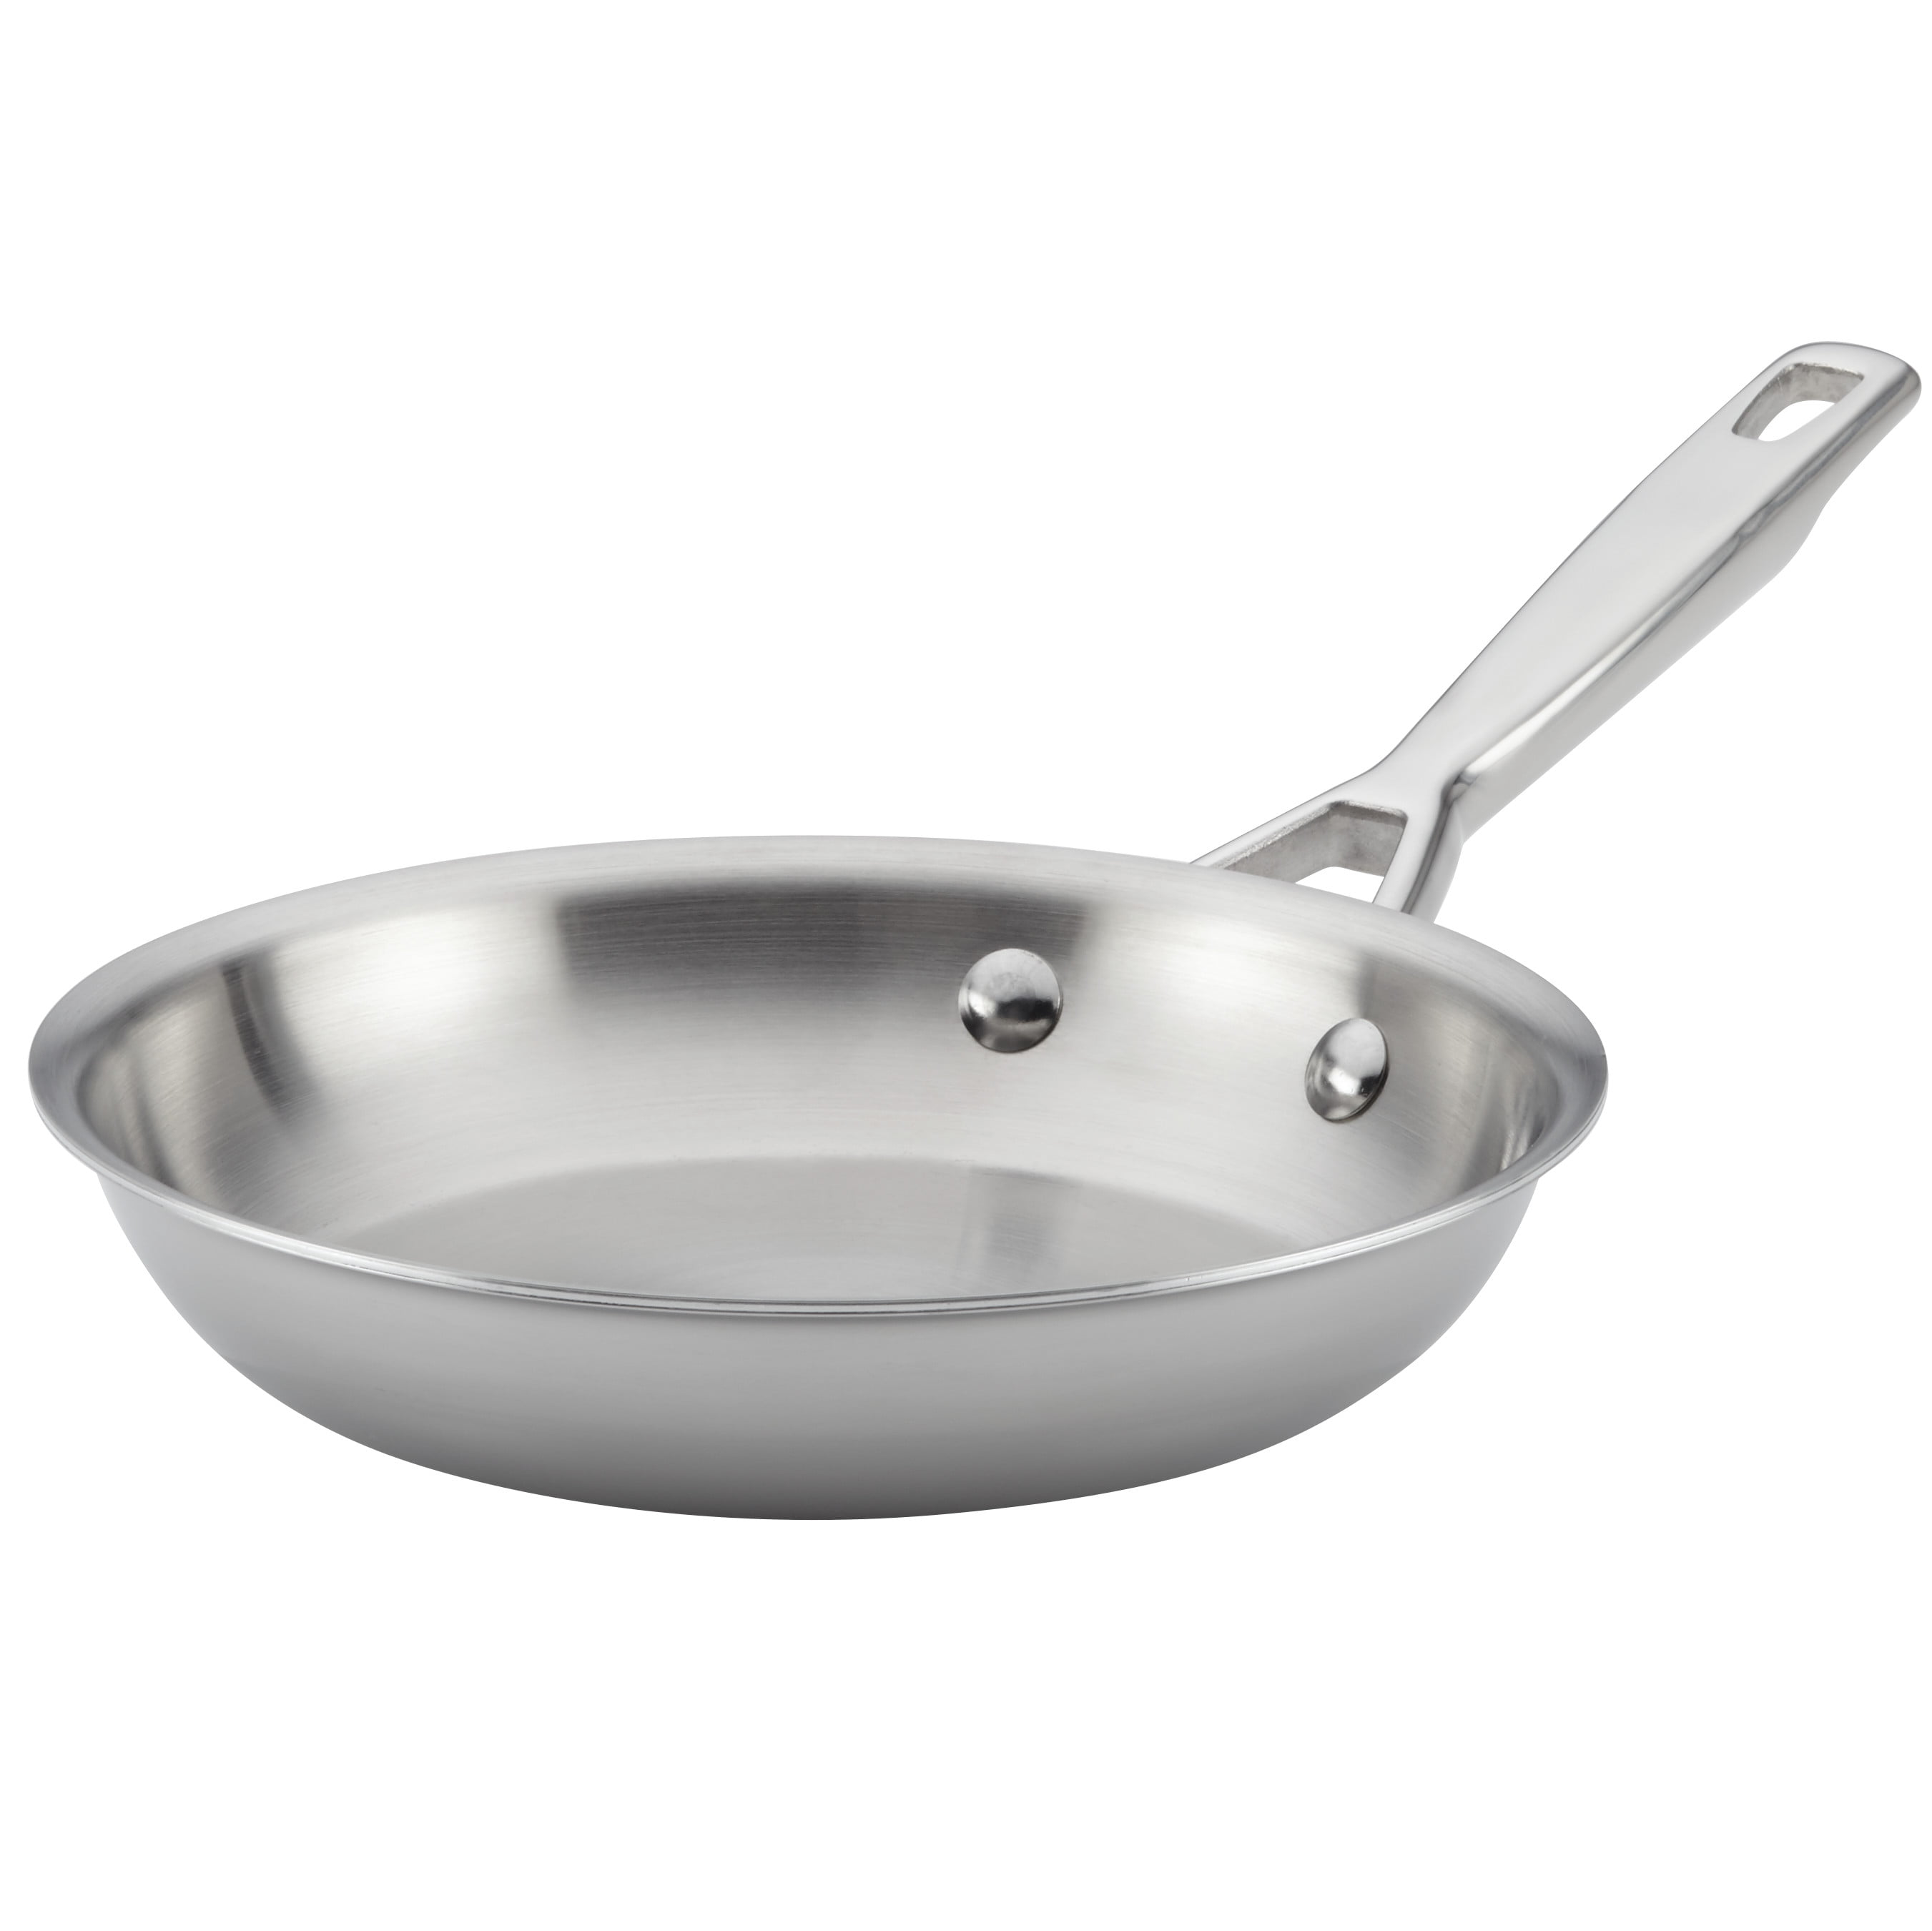 Anolon Tri-Ply Clad Stainless Steel French Skillet/Fry Pan, 8.5 Anolon Stainless Steel Frying Pan